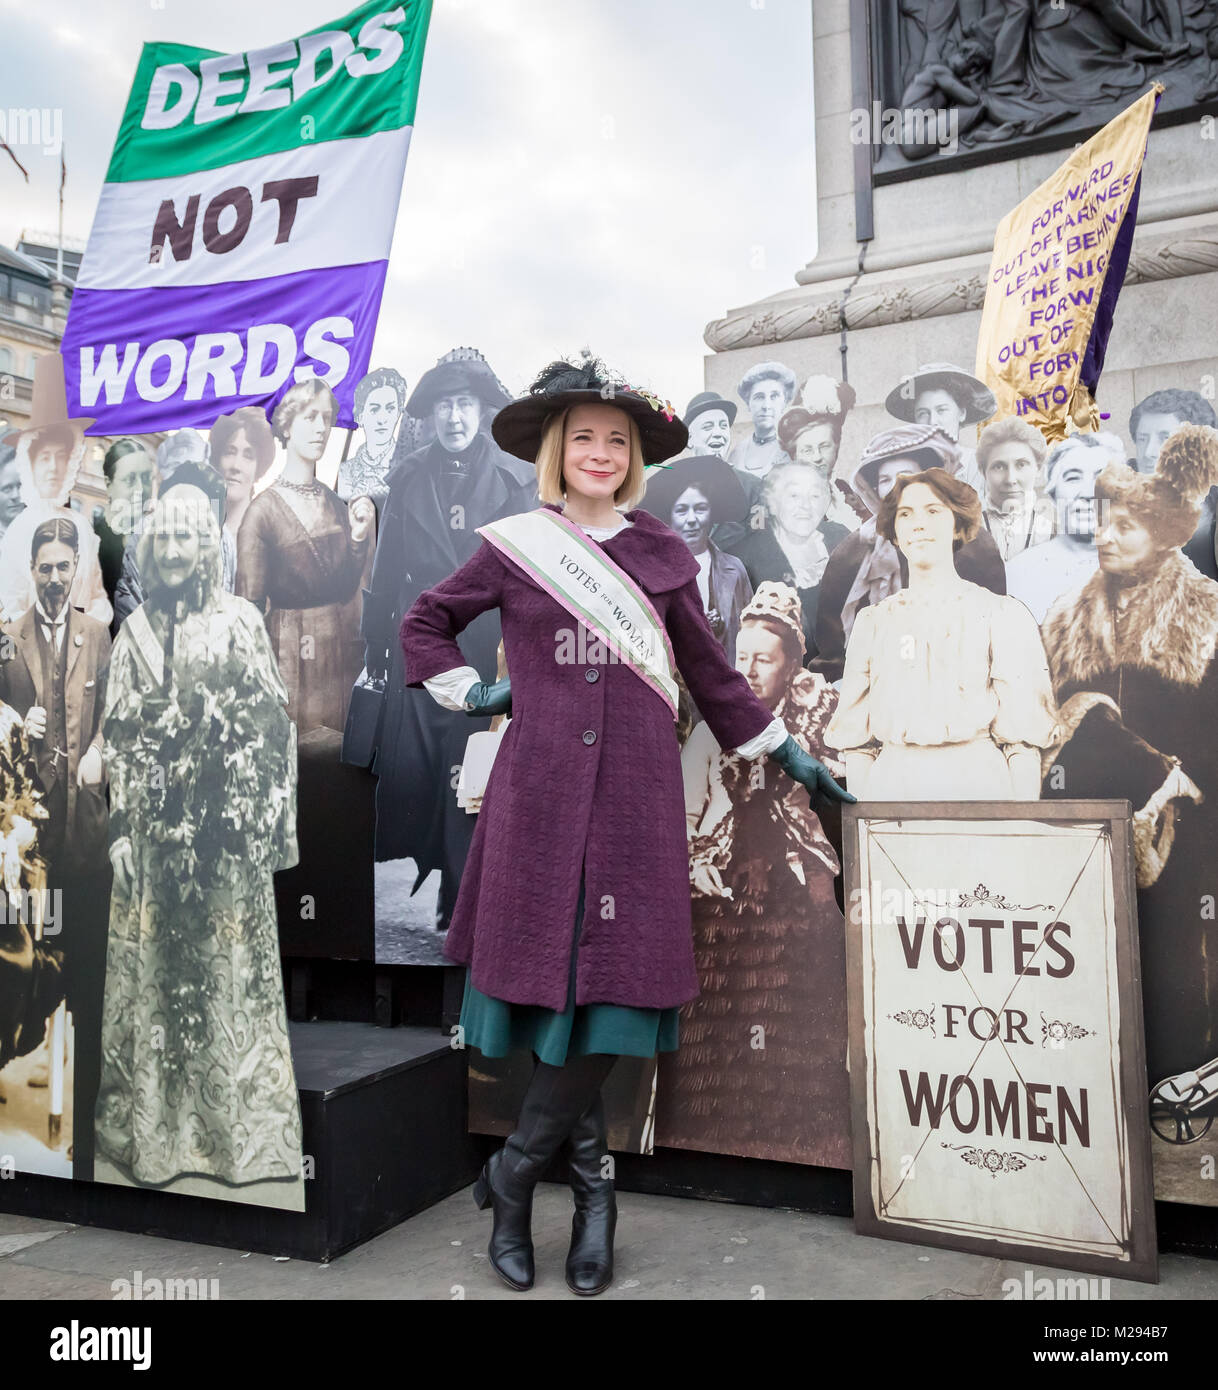 London, UK. 6th Feb, 2018. The Mayor of London including historian Lucy Worsley (pictured) hosts a symbolic exhibition in Trafalgar Square marking 100 years since the 1918 Representation of the People Act was passed - a landmark victory which gave the first women the right to vote. Credit: Guy Corbishley/Alamy Live News Stock Photo